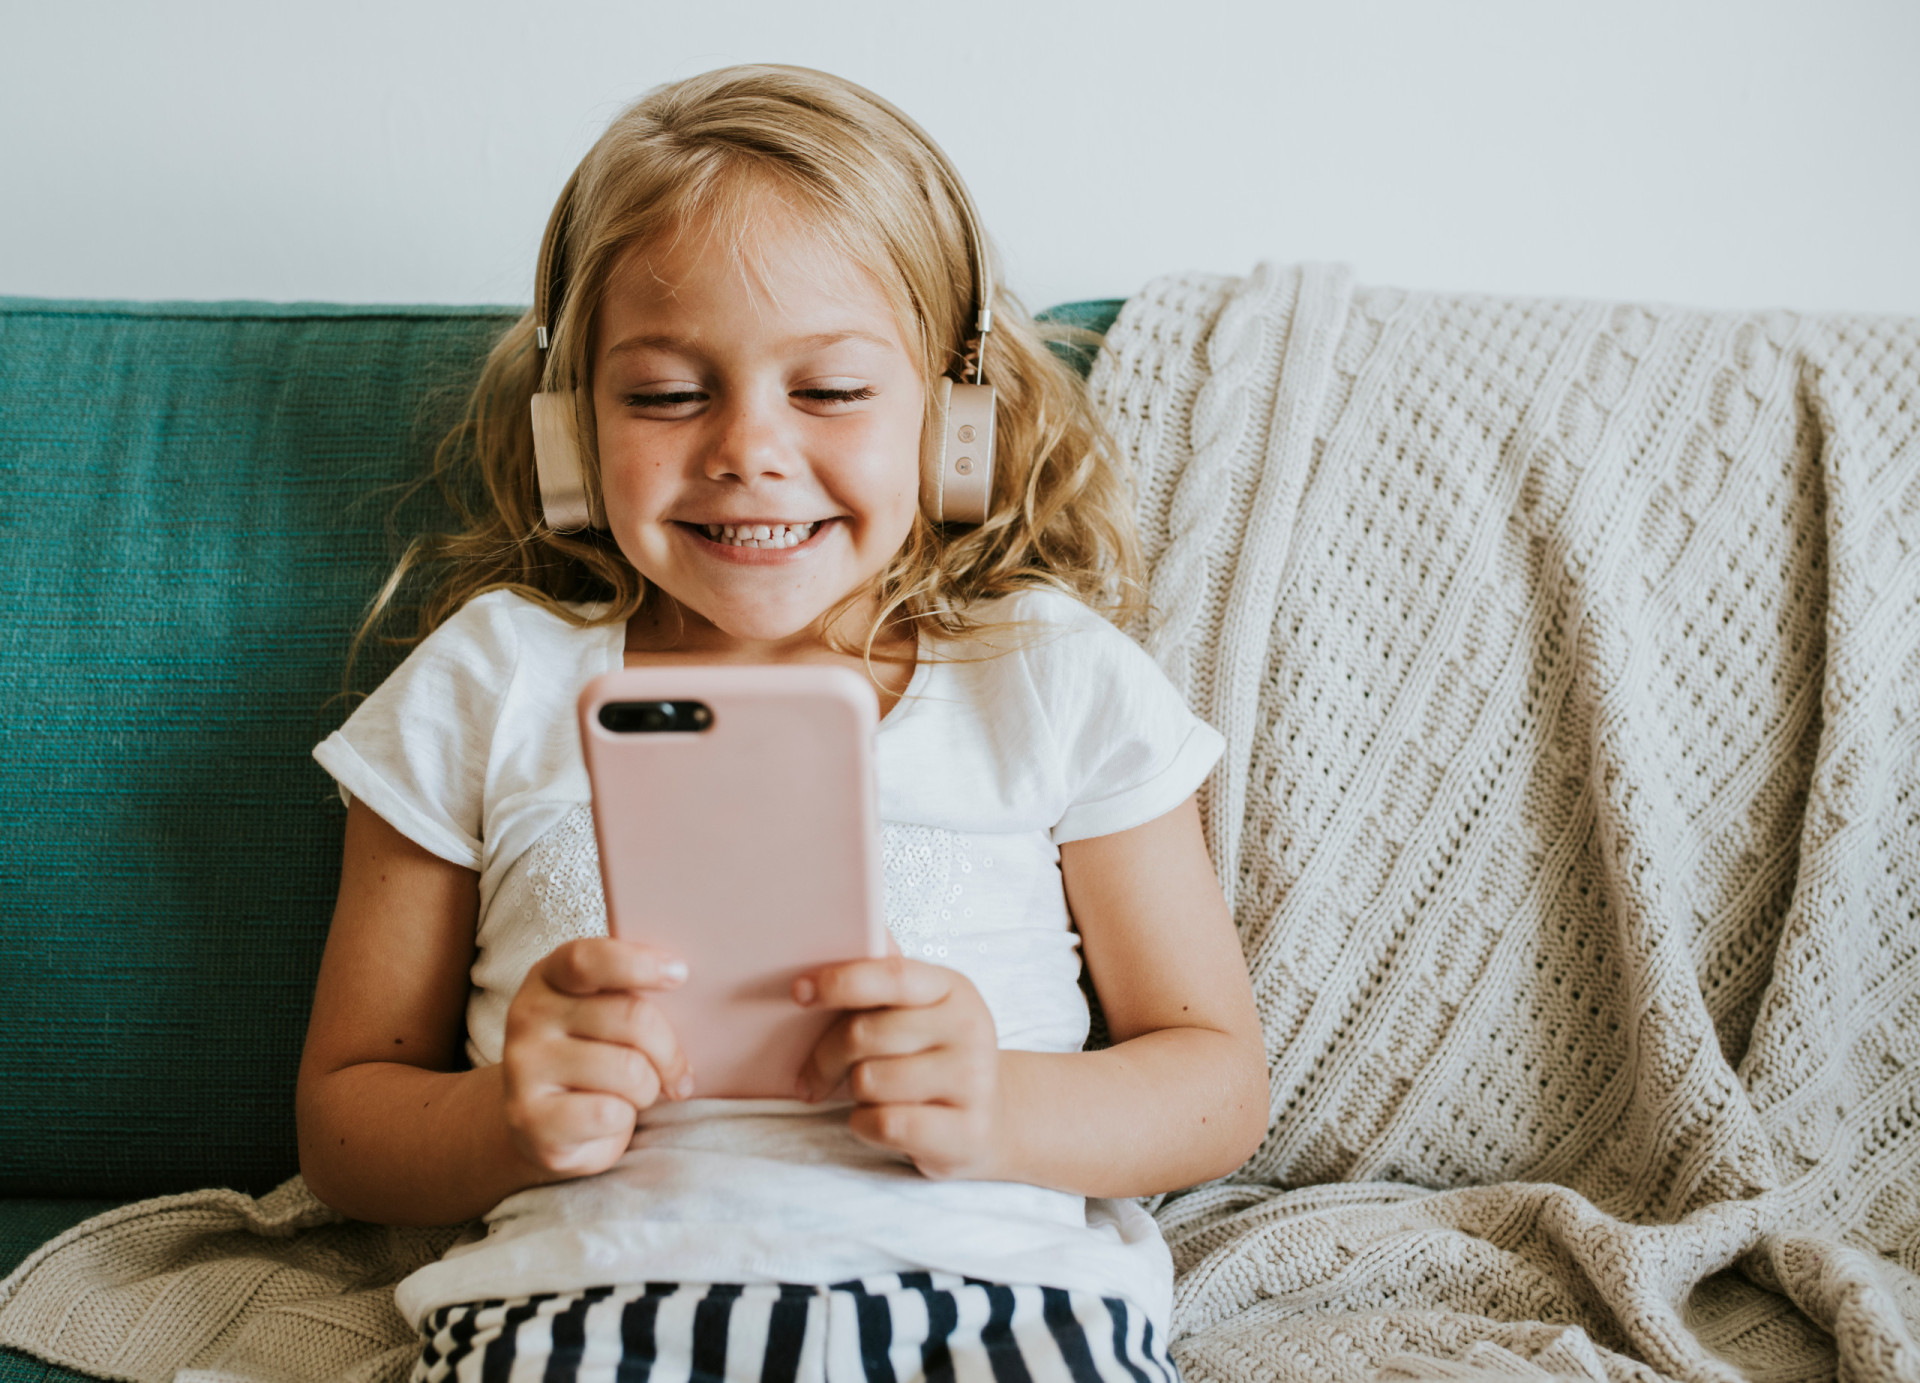 <p>In a digital age, teaching kids phone etiquette is essential. Remind them that being courteous in texts and calls is just as important as face-to-face interactions.</p><p><a href="https://www.msn.com/en-us/community/channel/vid-7xx8mnucu55yw63we9va2gwr7uihbxwc68fxqp25x6tg4ftibpra?cvid=94631541bc0f4f89bfd59158d696ad7e">Follow us and access great exclusive content every day</a></p>